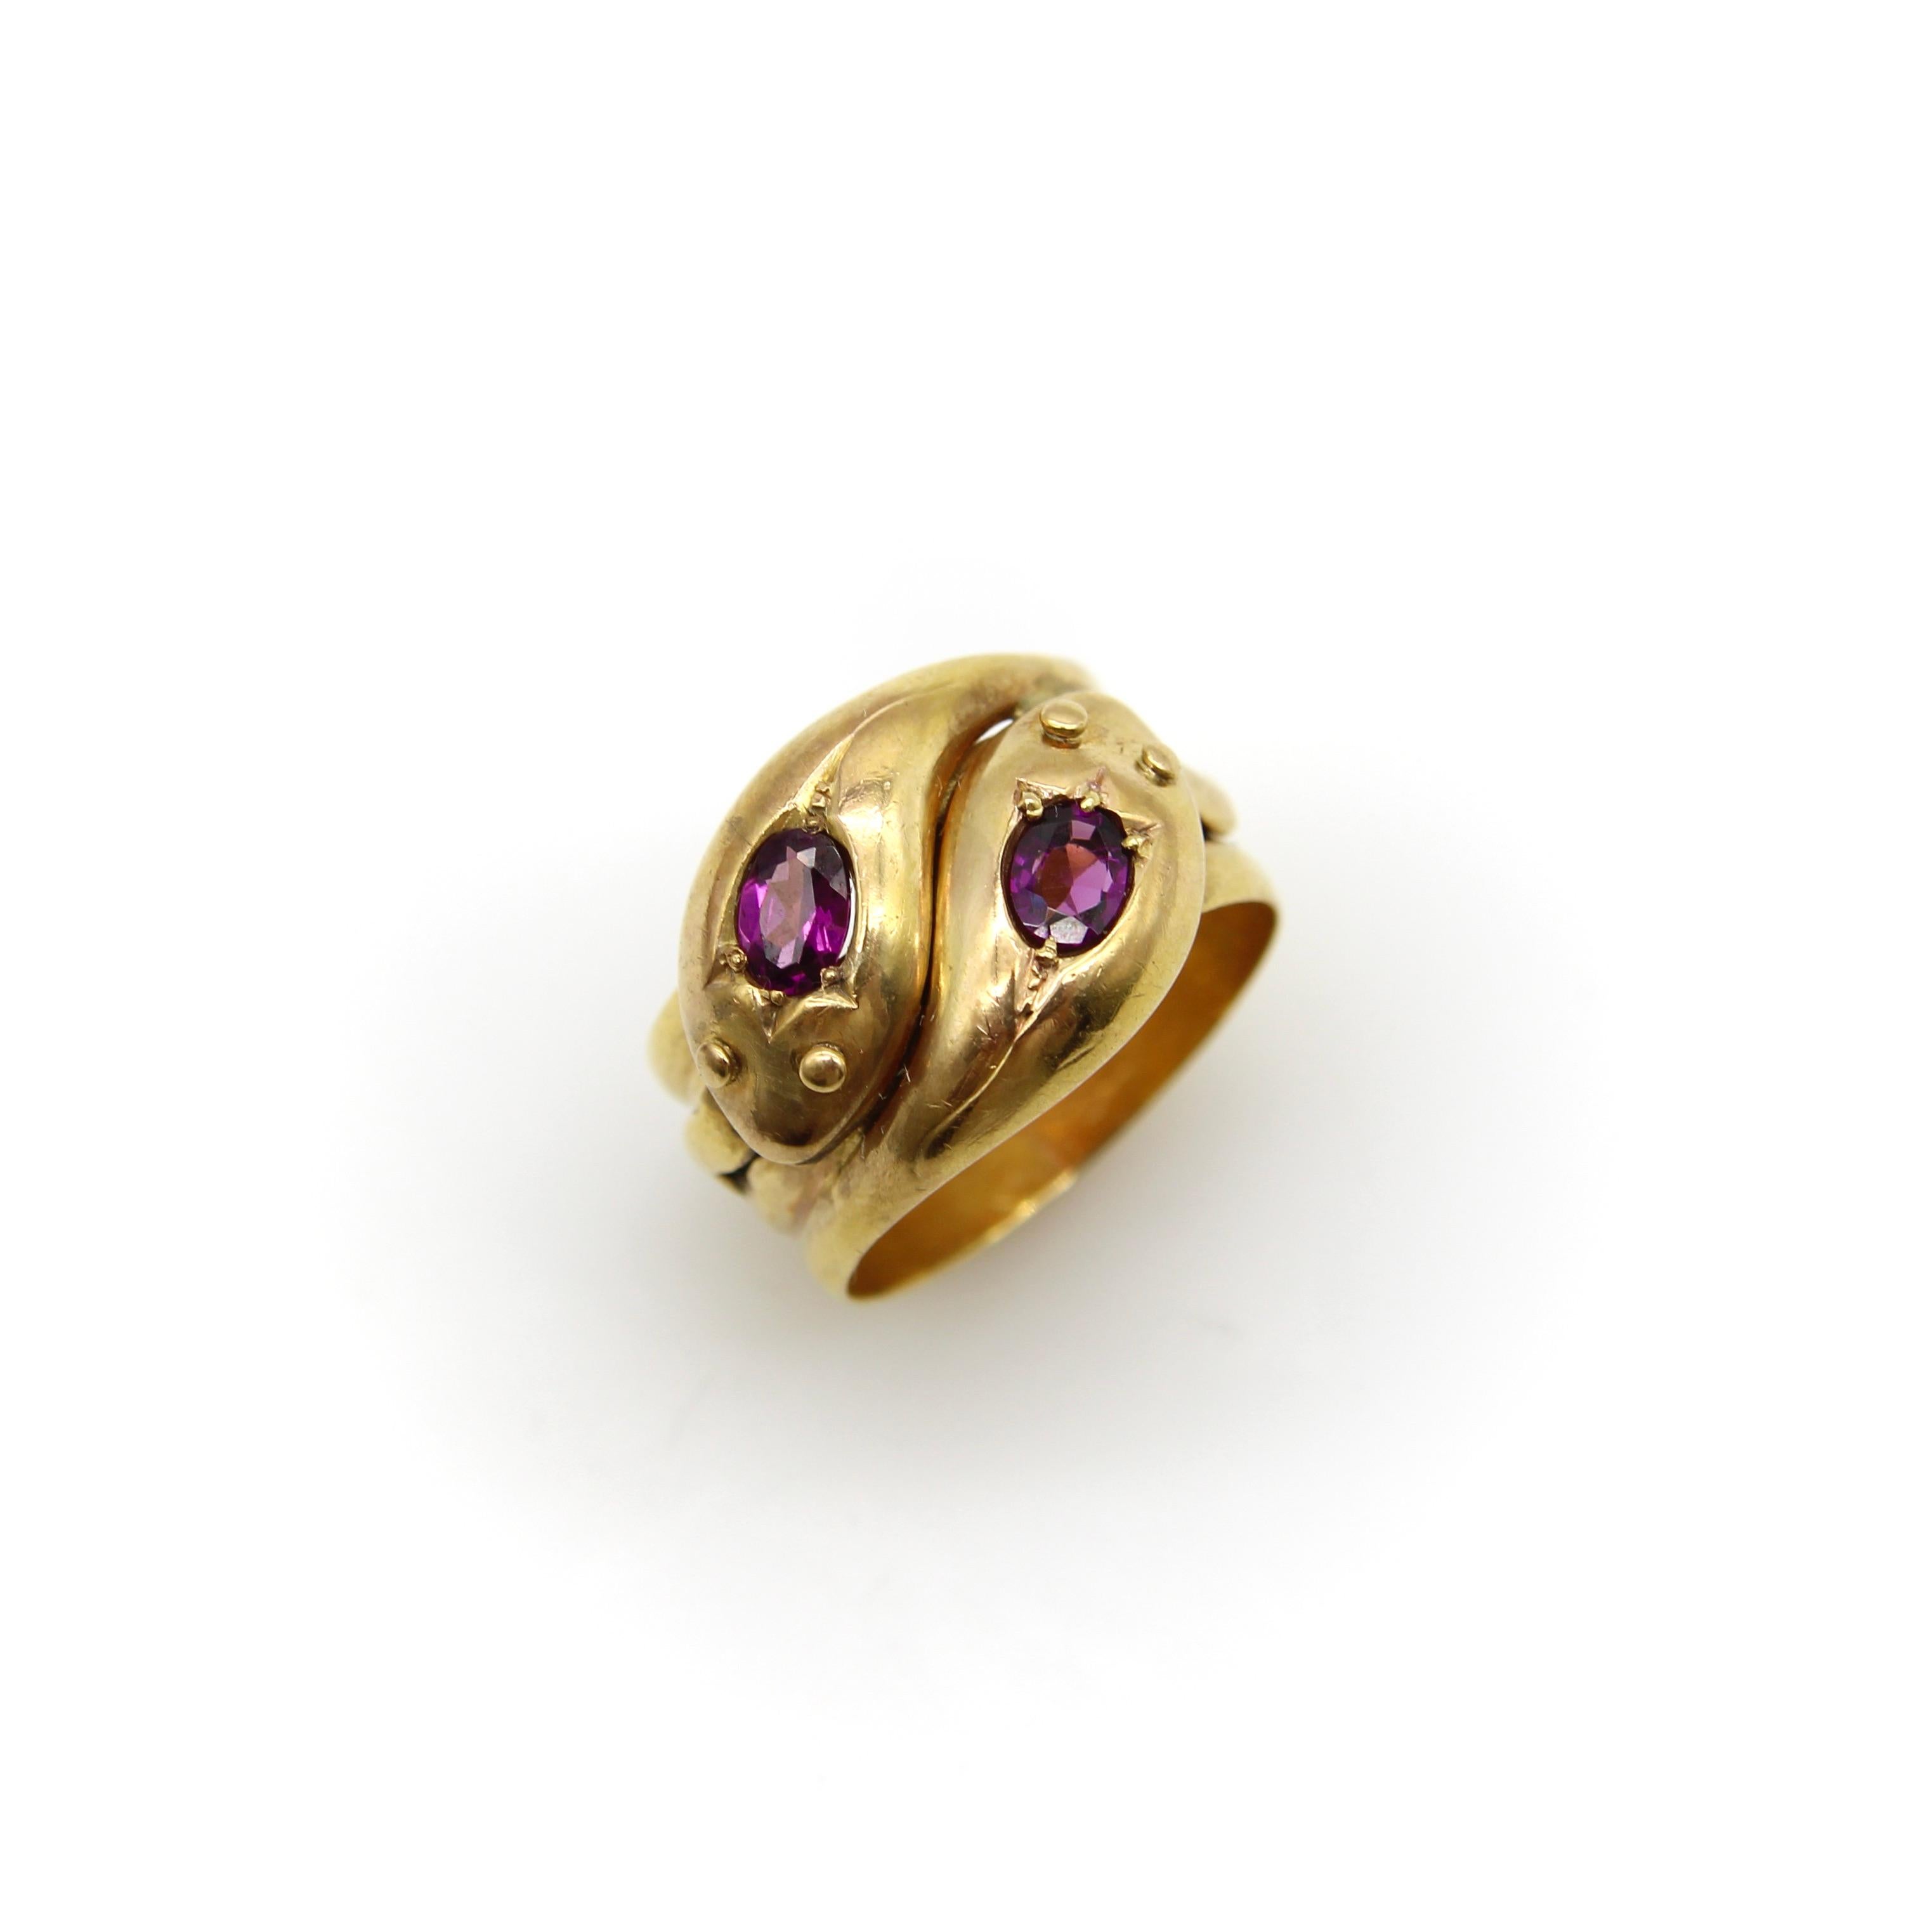 This is a classic 9k gold snake ring that has two beautiful rhodolite garnets in the head of each snake. The snake heads interlock   and the garnets are bead set into a mount that are carved to look like tulips. The oval rhodolite garnets are a deep